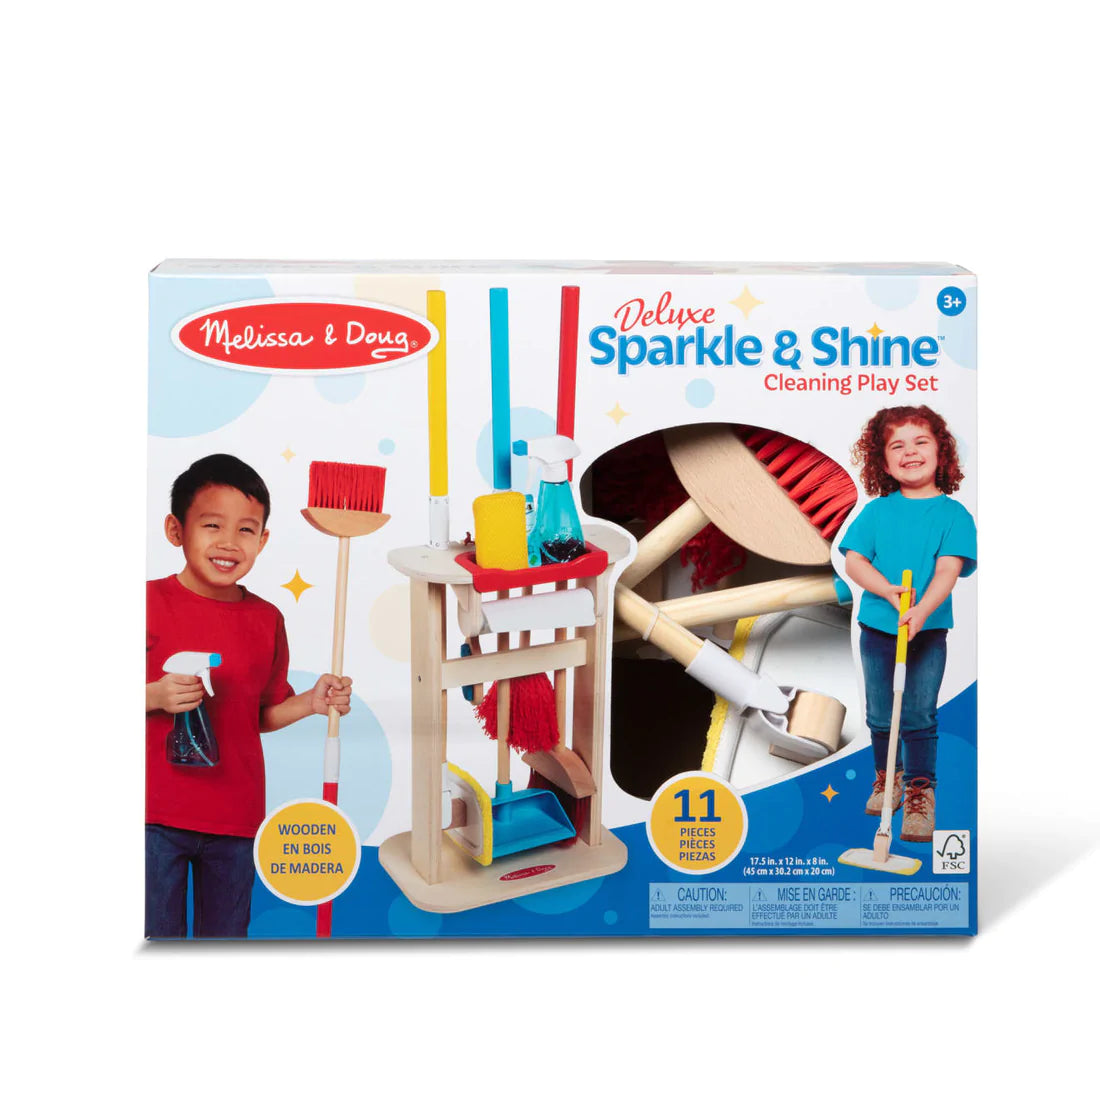 Deluxe Sparkle & Shine Cleaning Play set